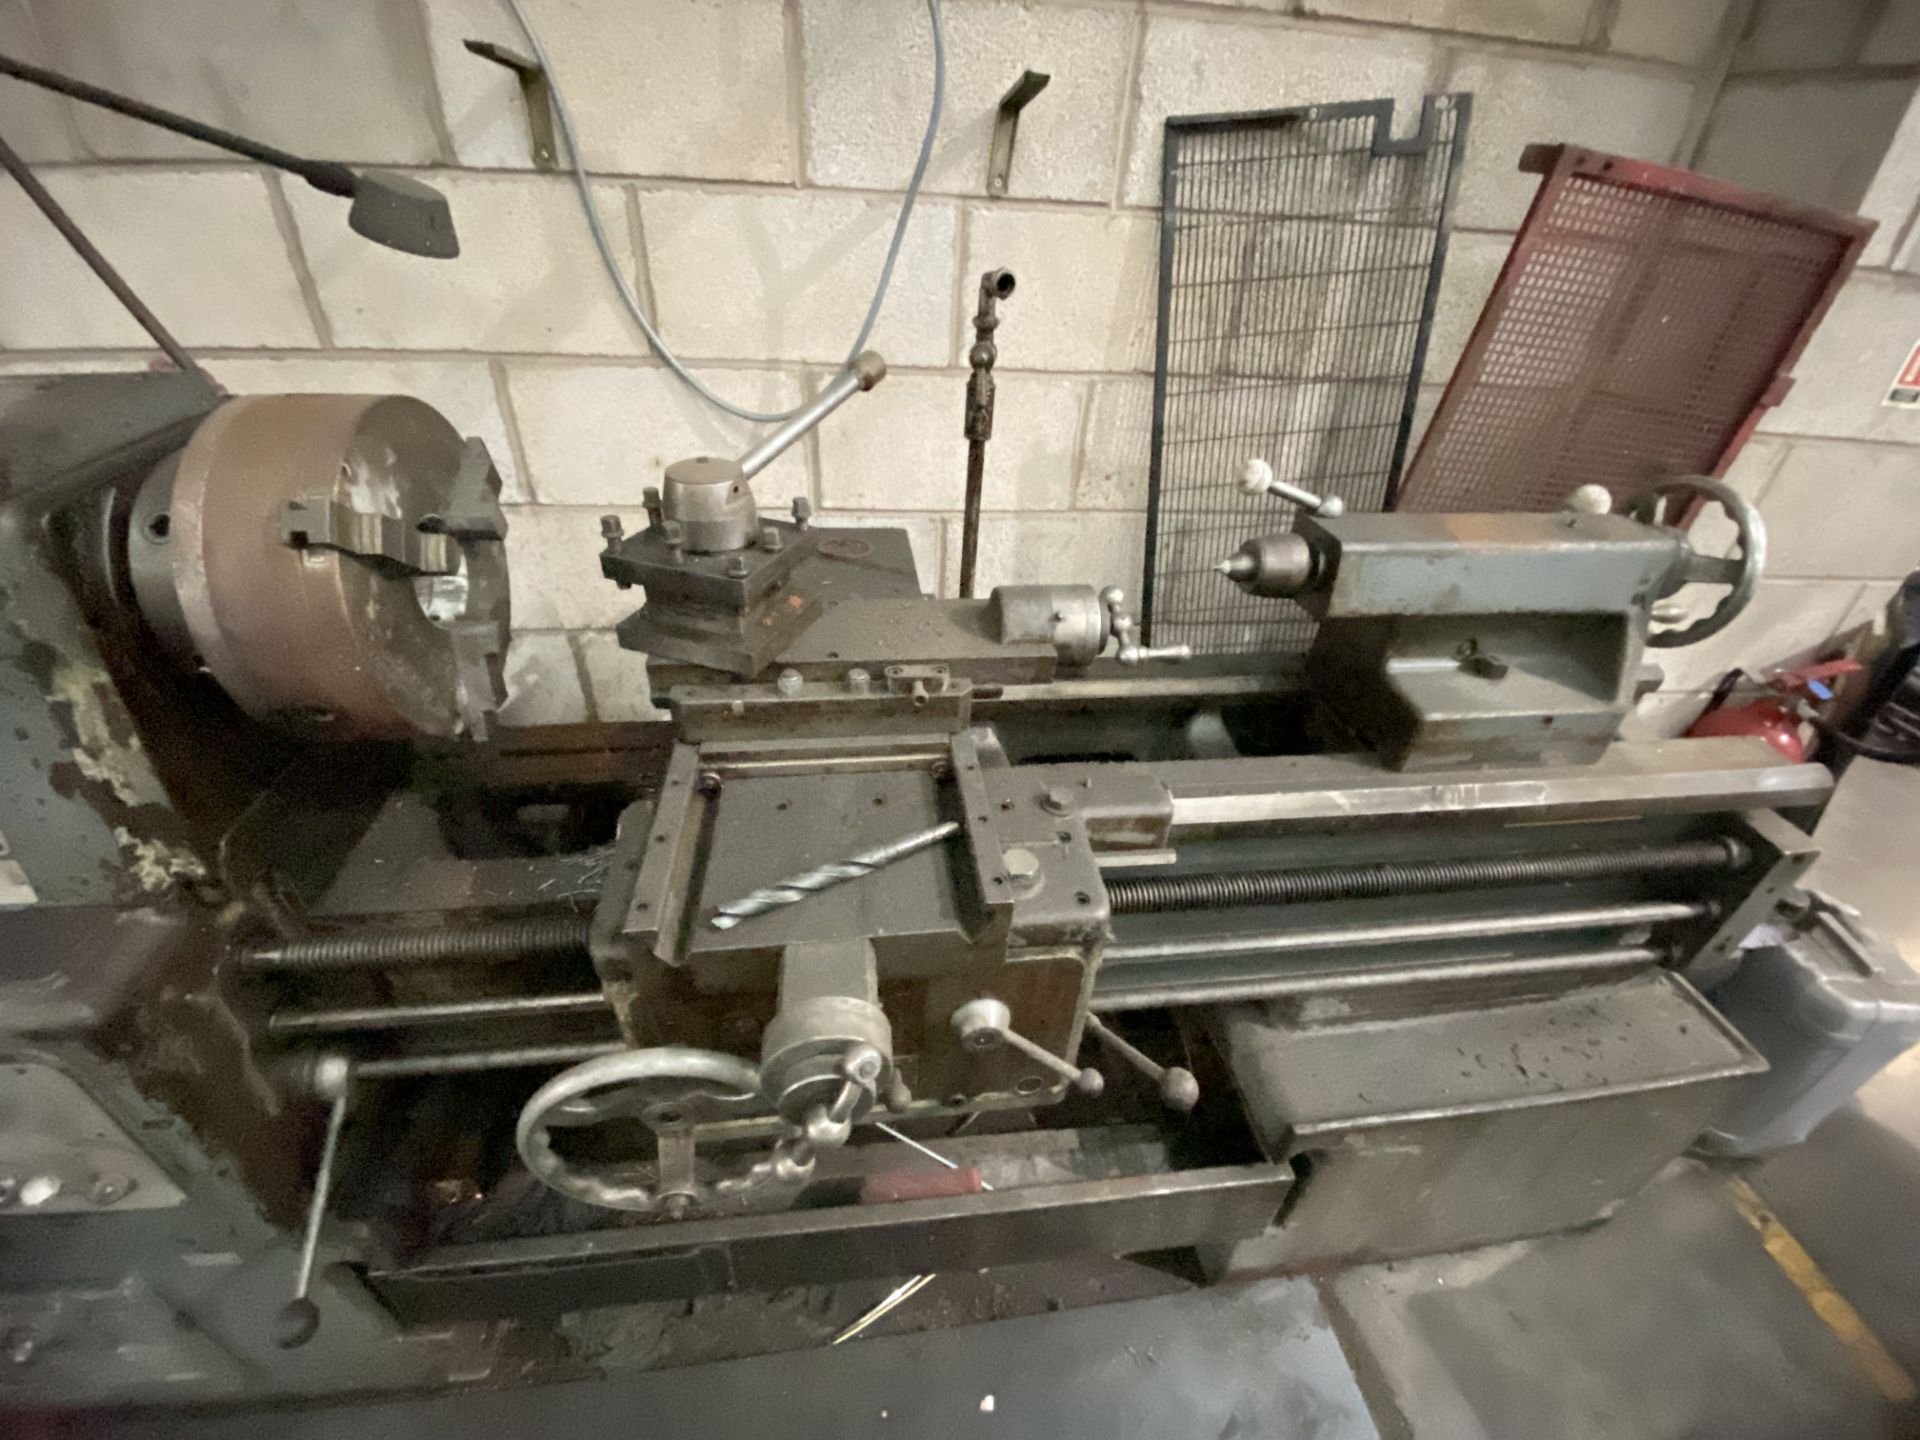 Harrison 17in. Swing SS & SC Gap Bed Centre Lathe, serial no. 1741012, approx. 440mm swing over bed, - Image 2 of 4